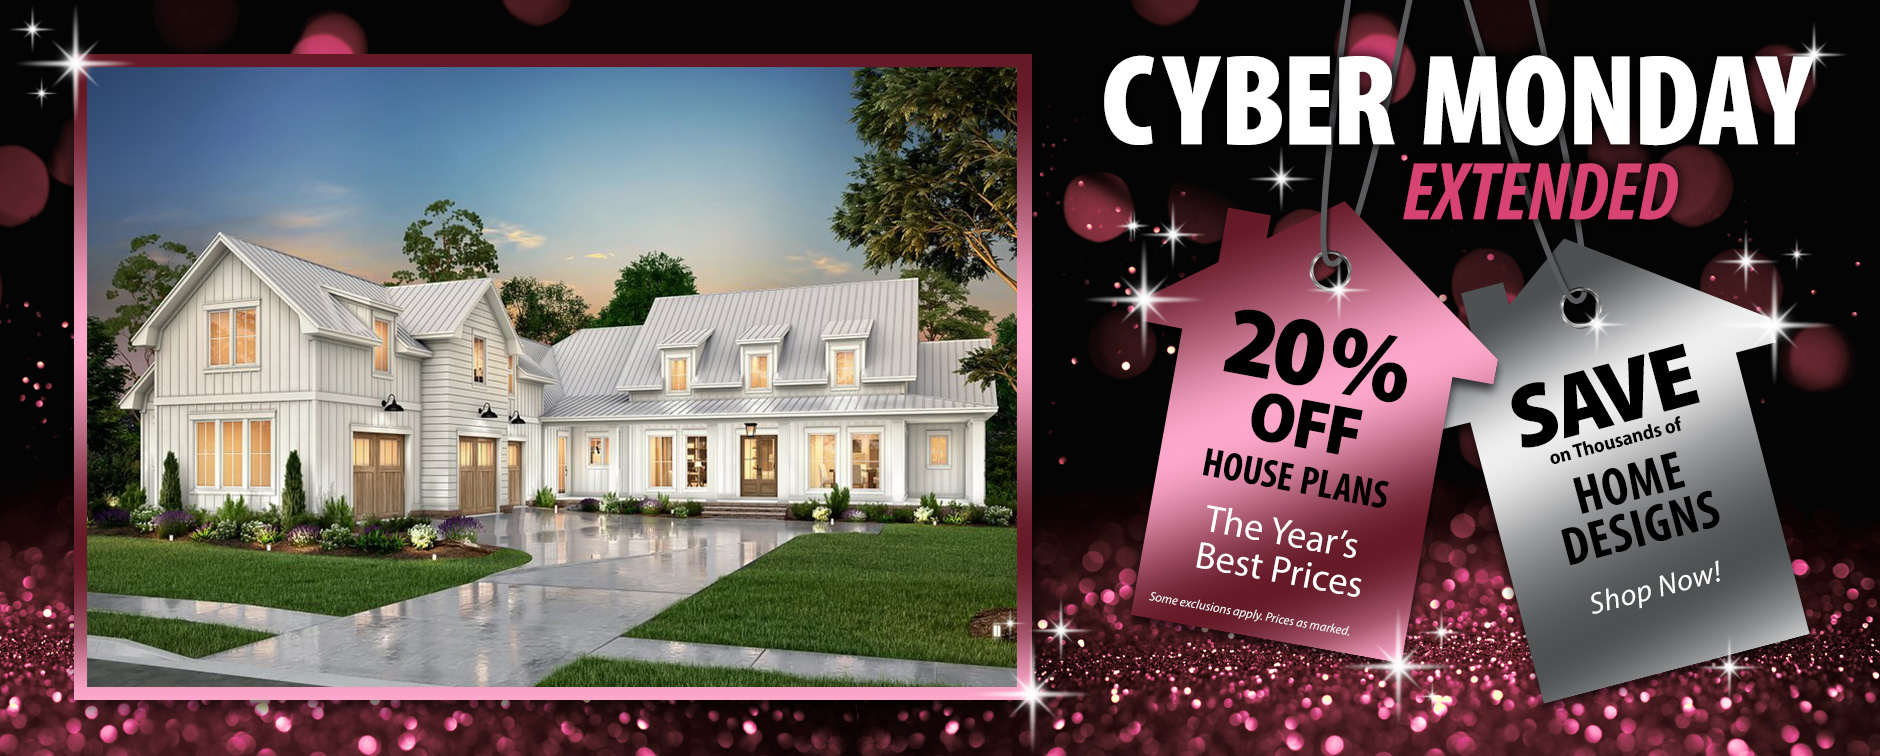 Cyber Savings Extended: 20% Off House Plans